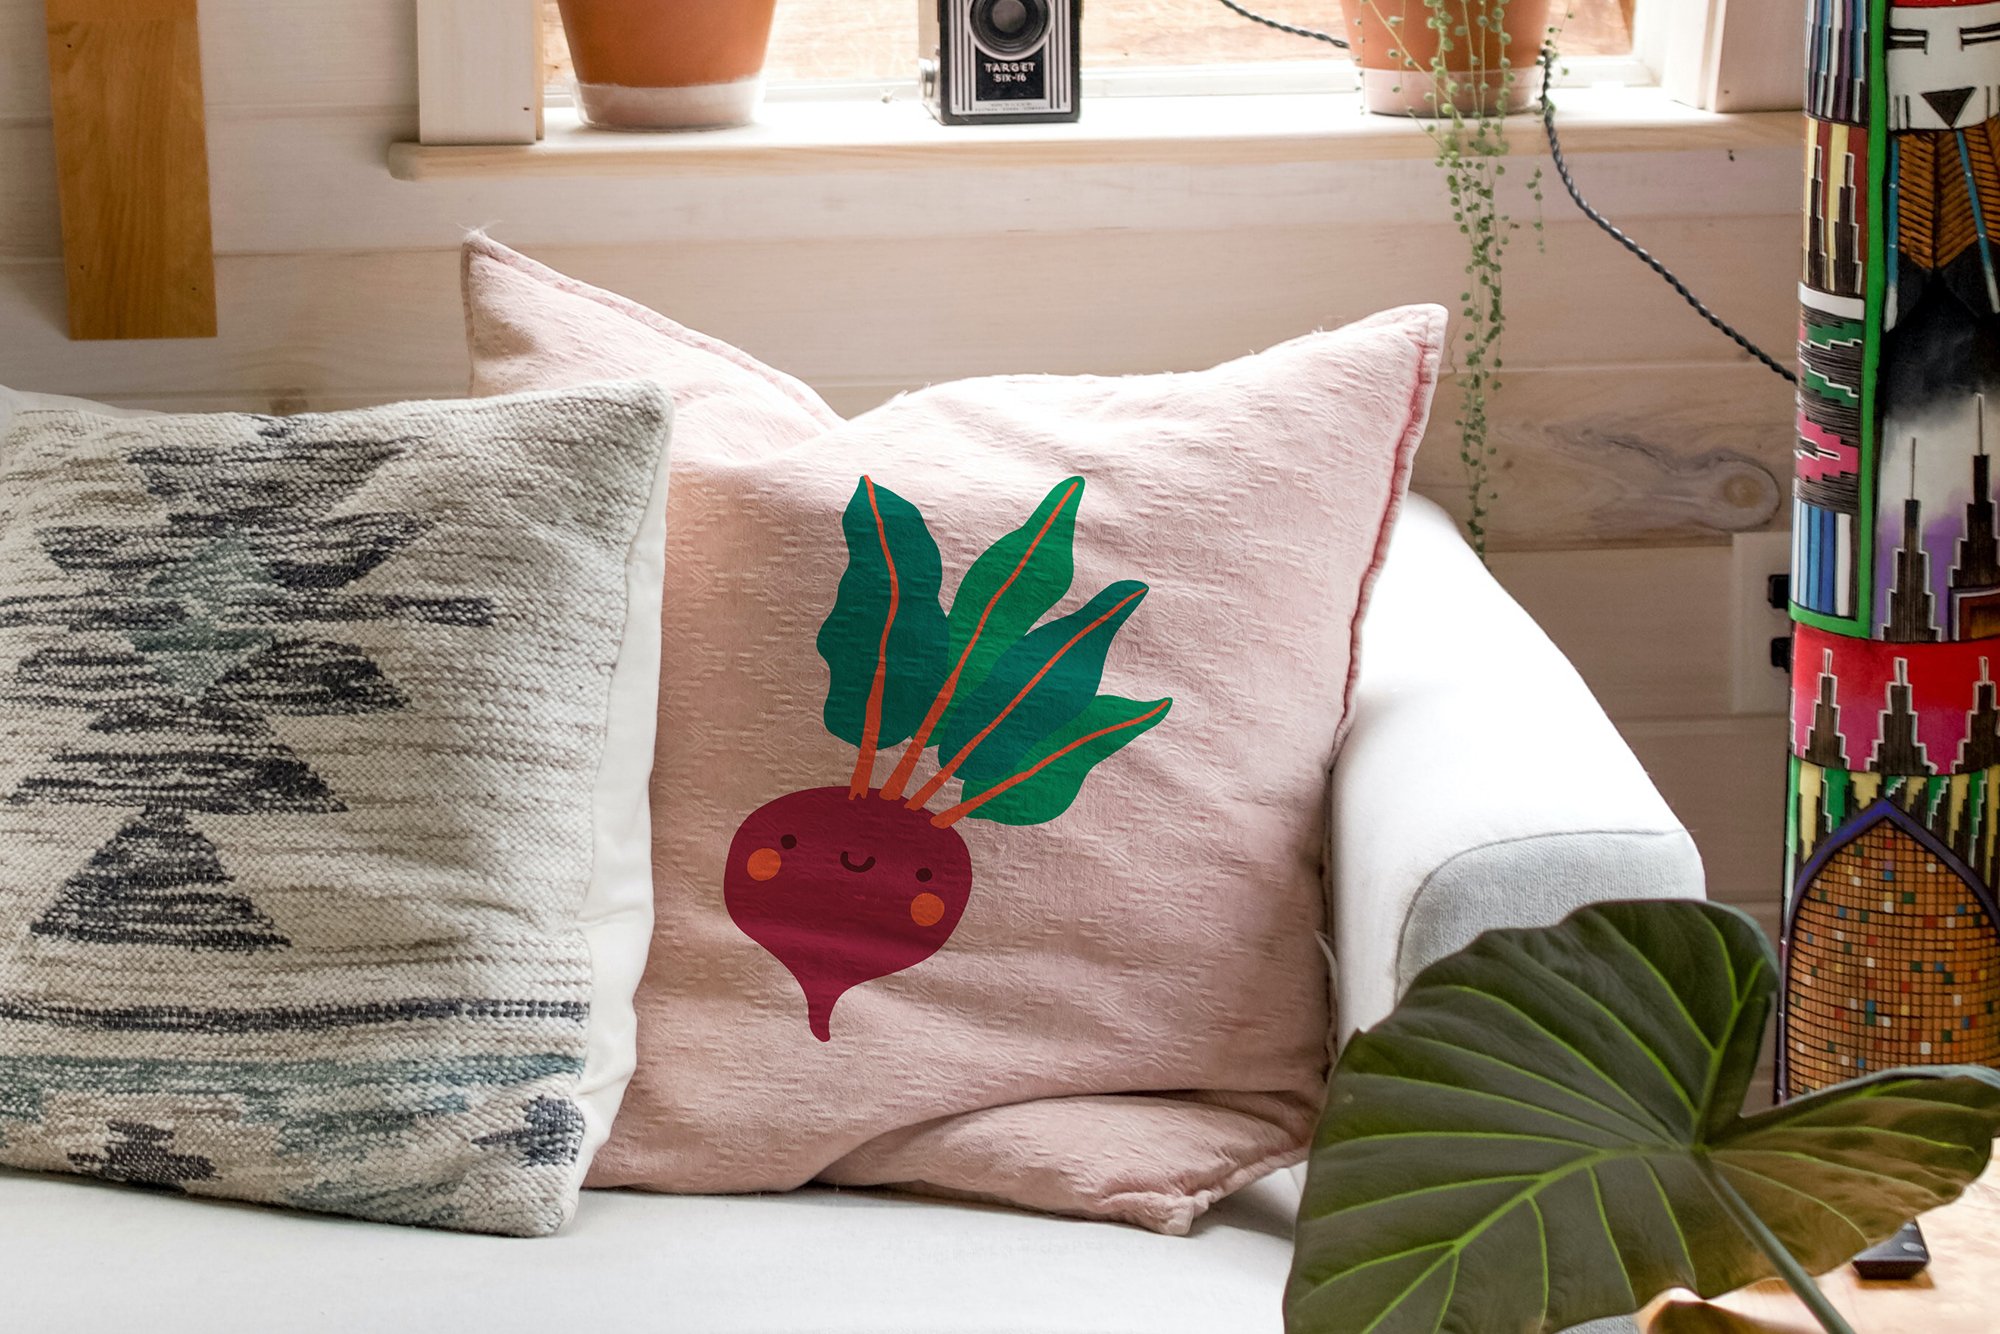 Classic decorate pillow with beetroots illustrations.